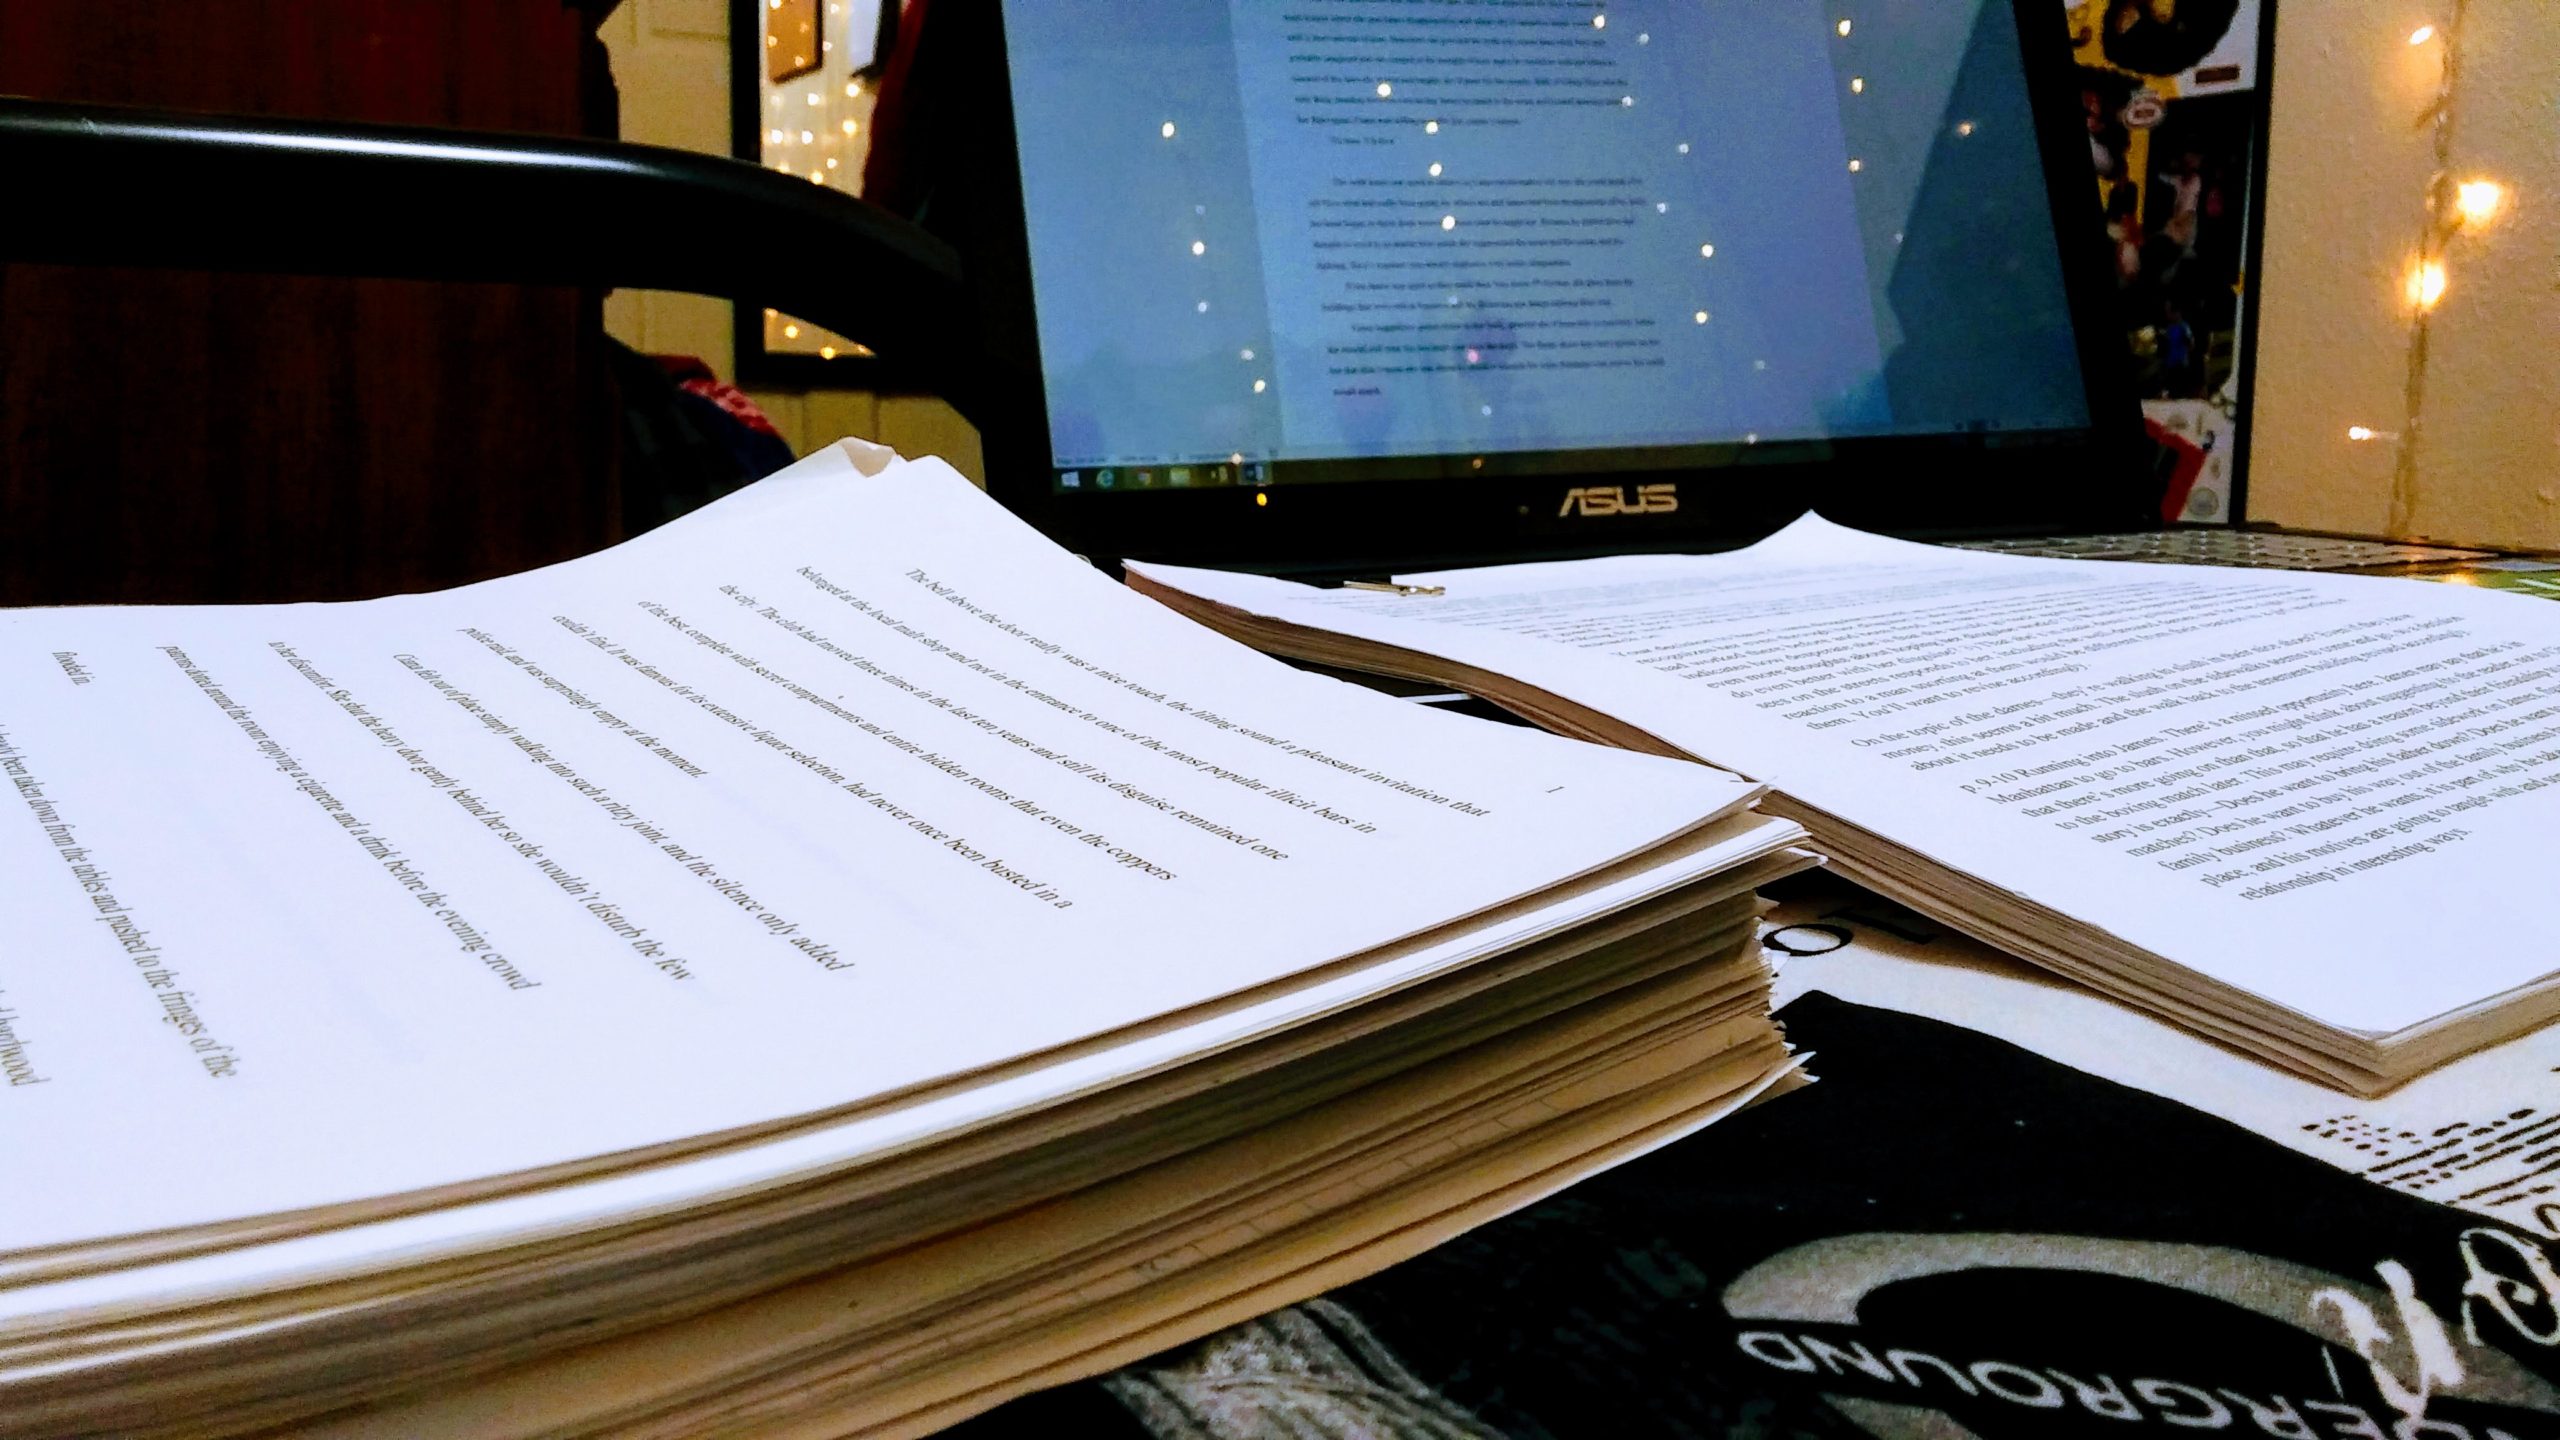 Stacks of paper from a manuscript sit in front of a laptop.